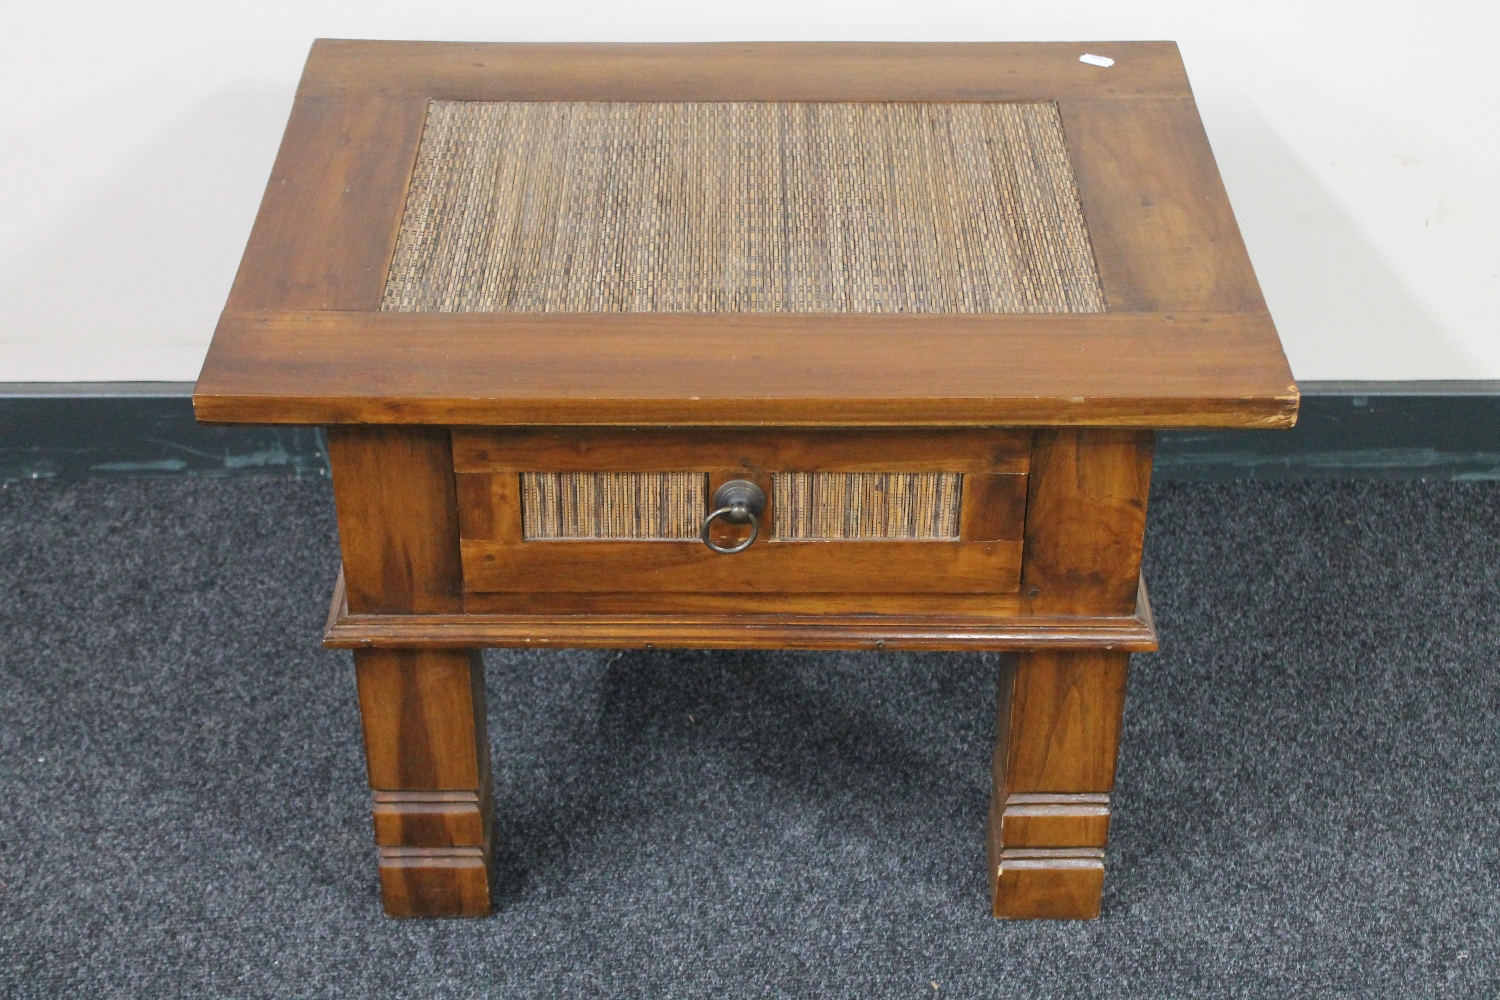 A contemporary hardwood lamp table with rattan insert